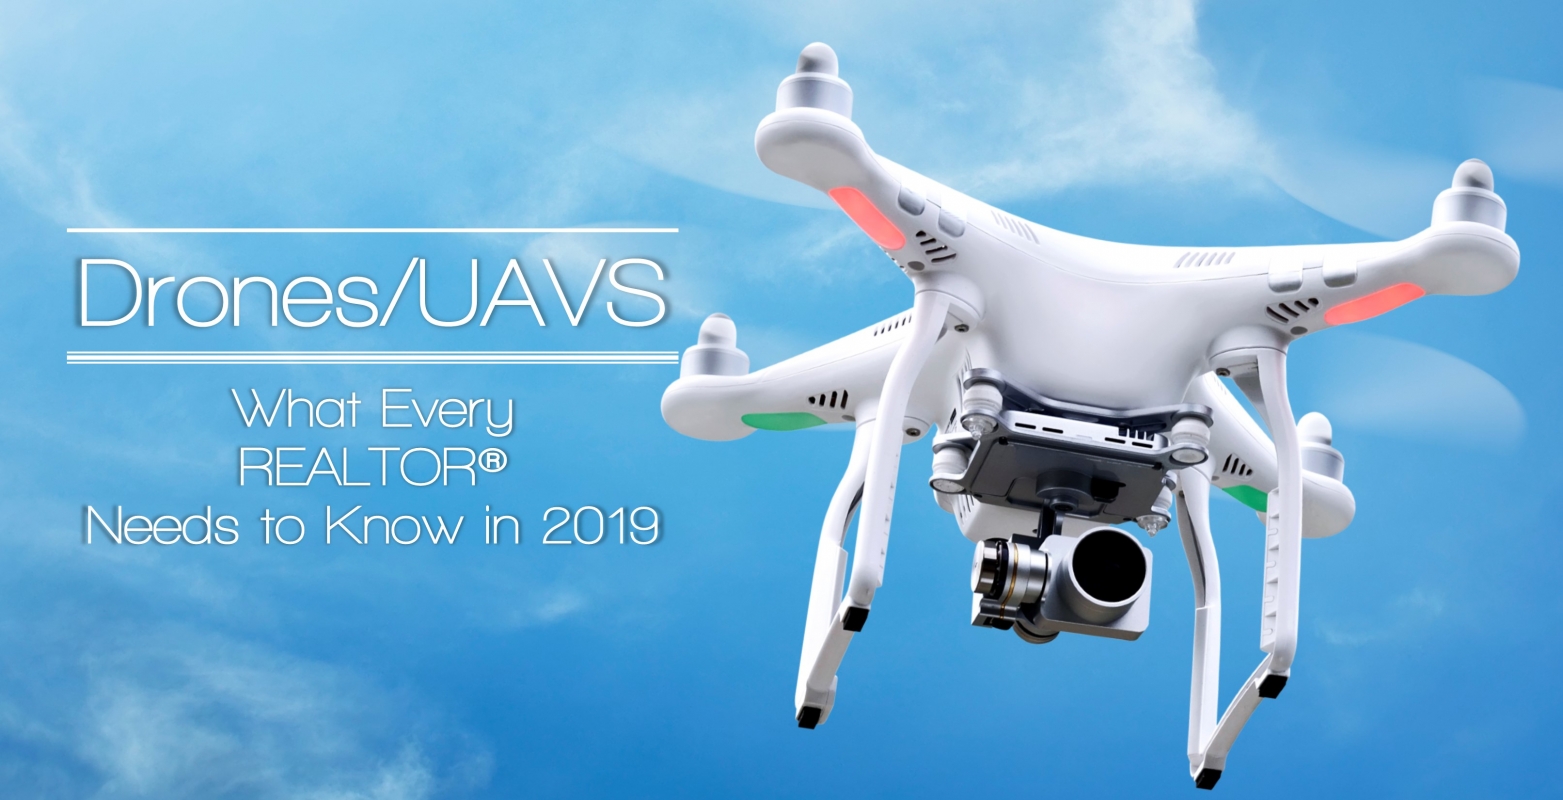 Drones/UAVs--What REALTORS Need to Know in 2019